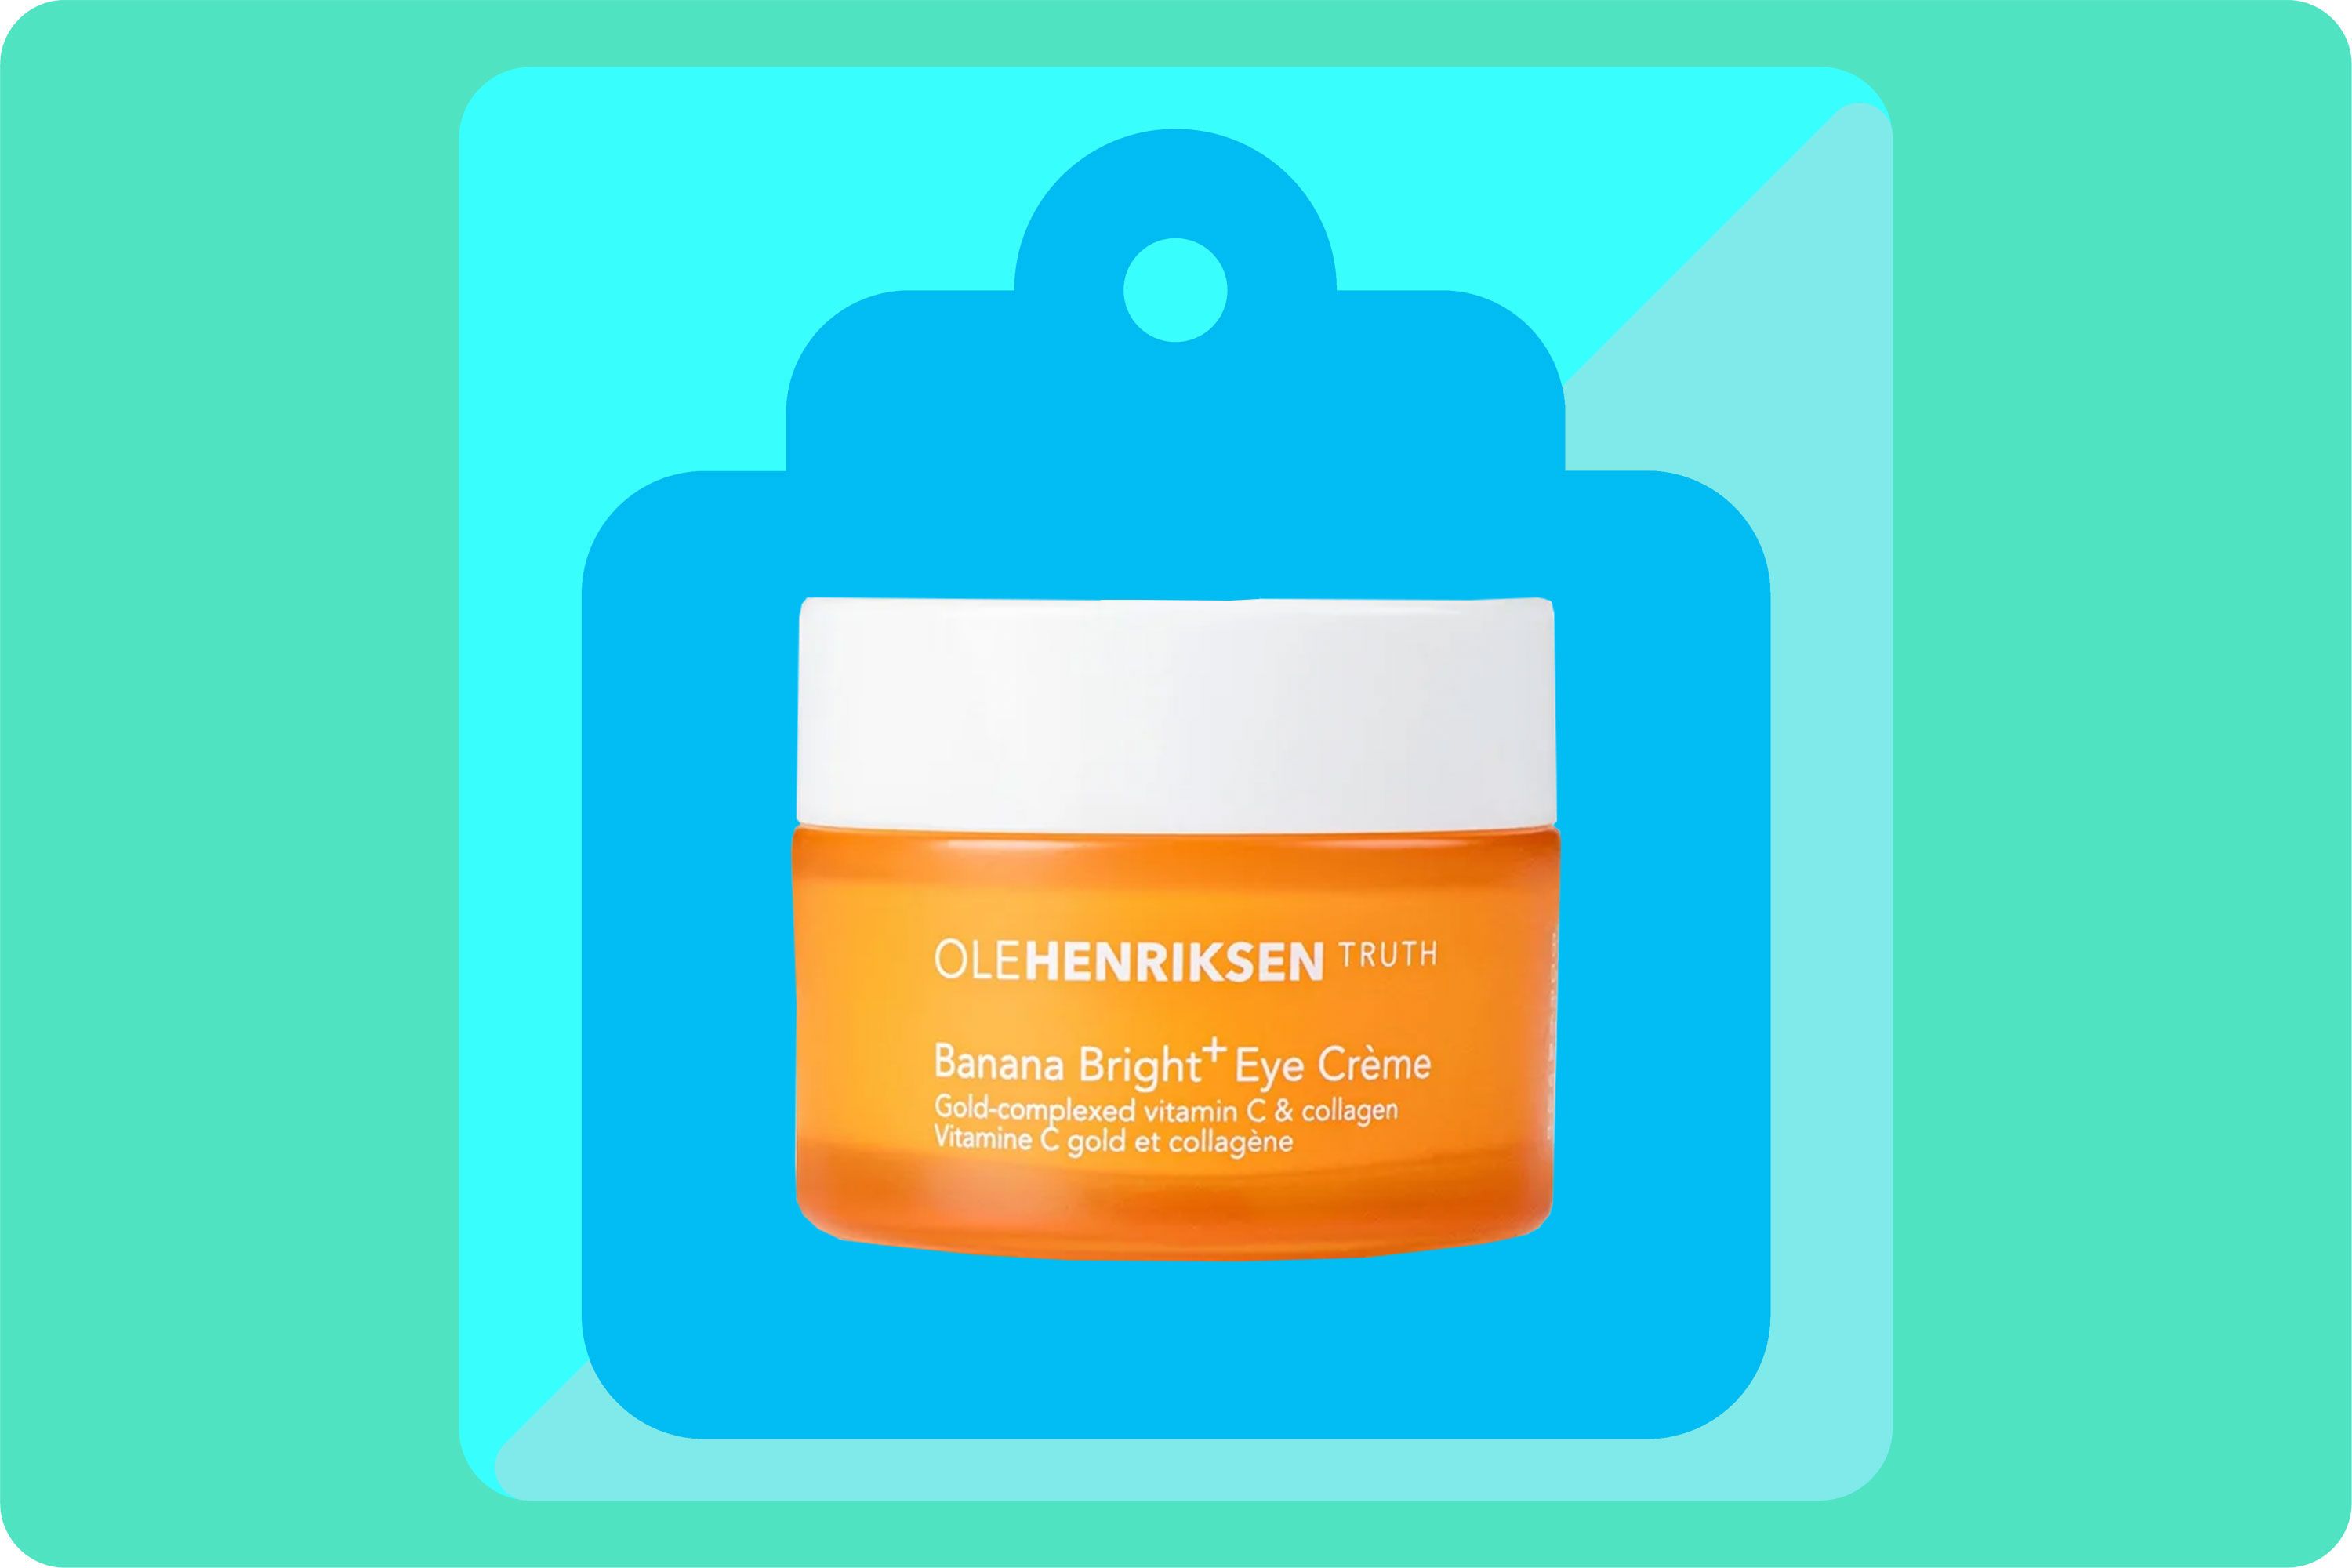 Banana Bright+ Eye Crème by Ole Henriksen Online, THE ICONIC